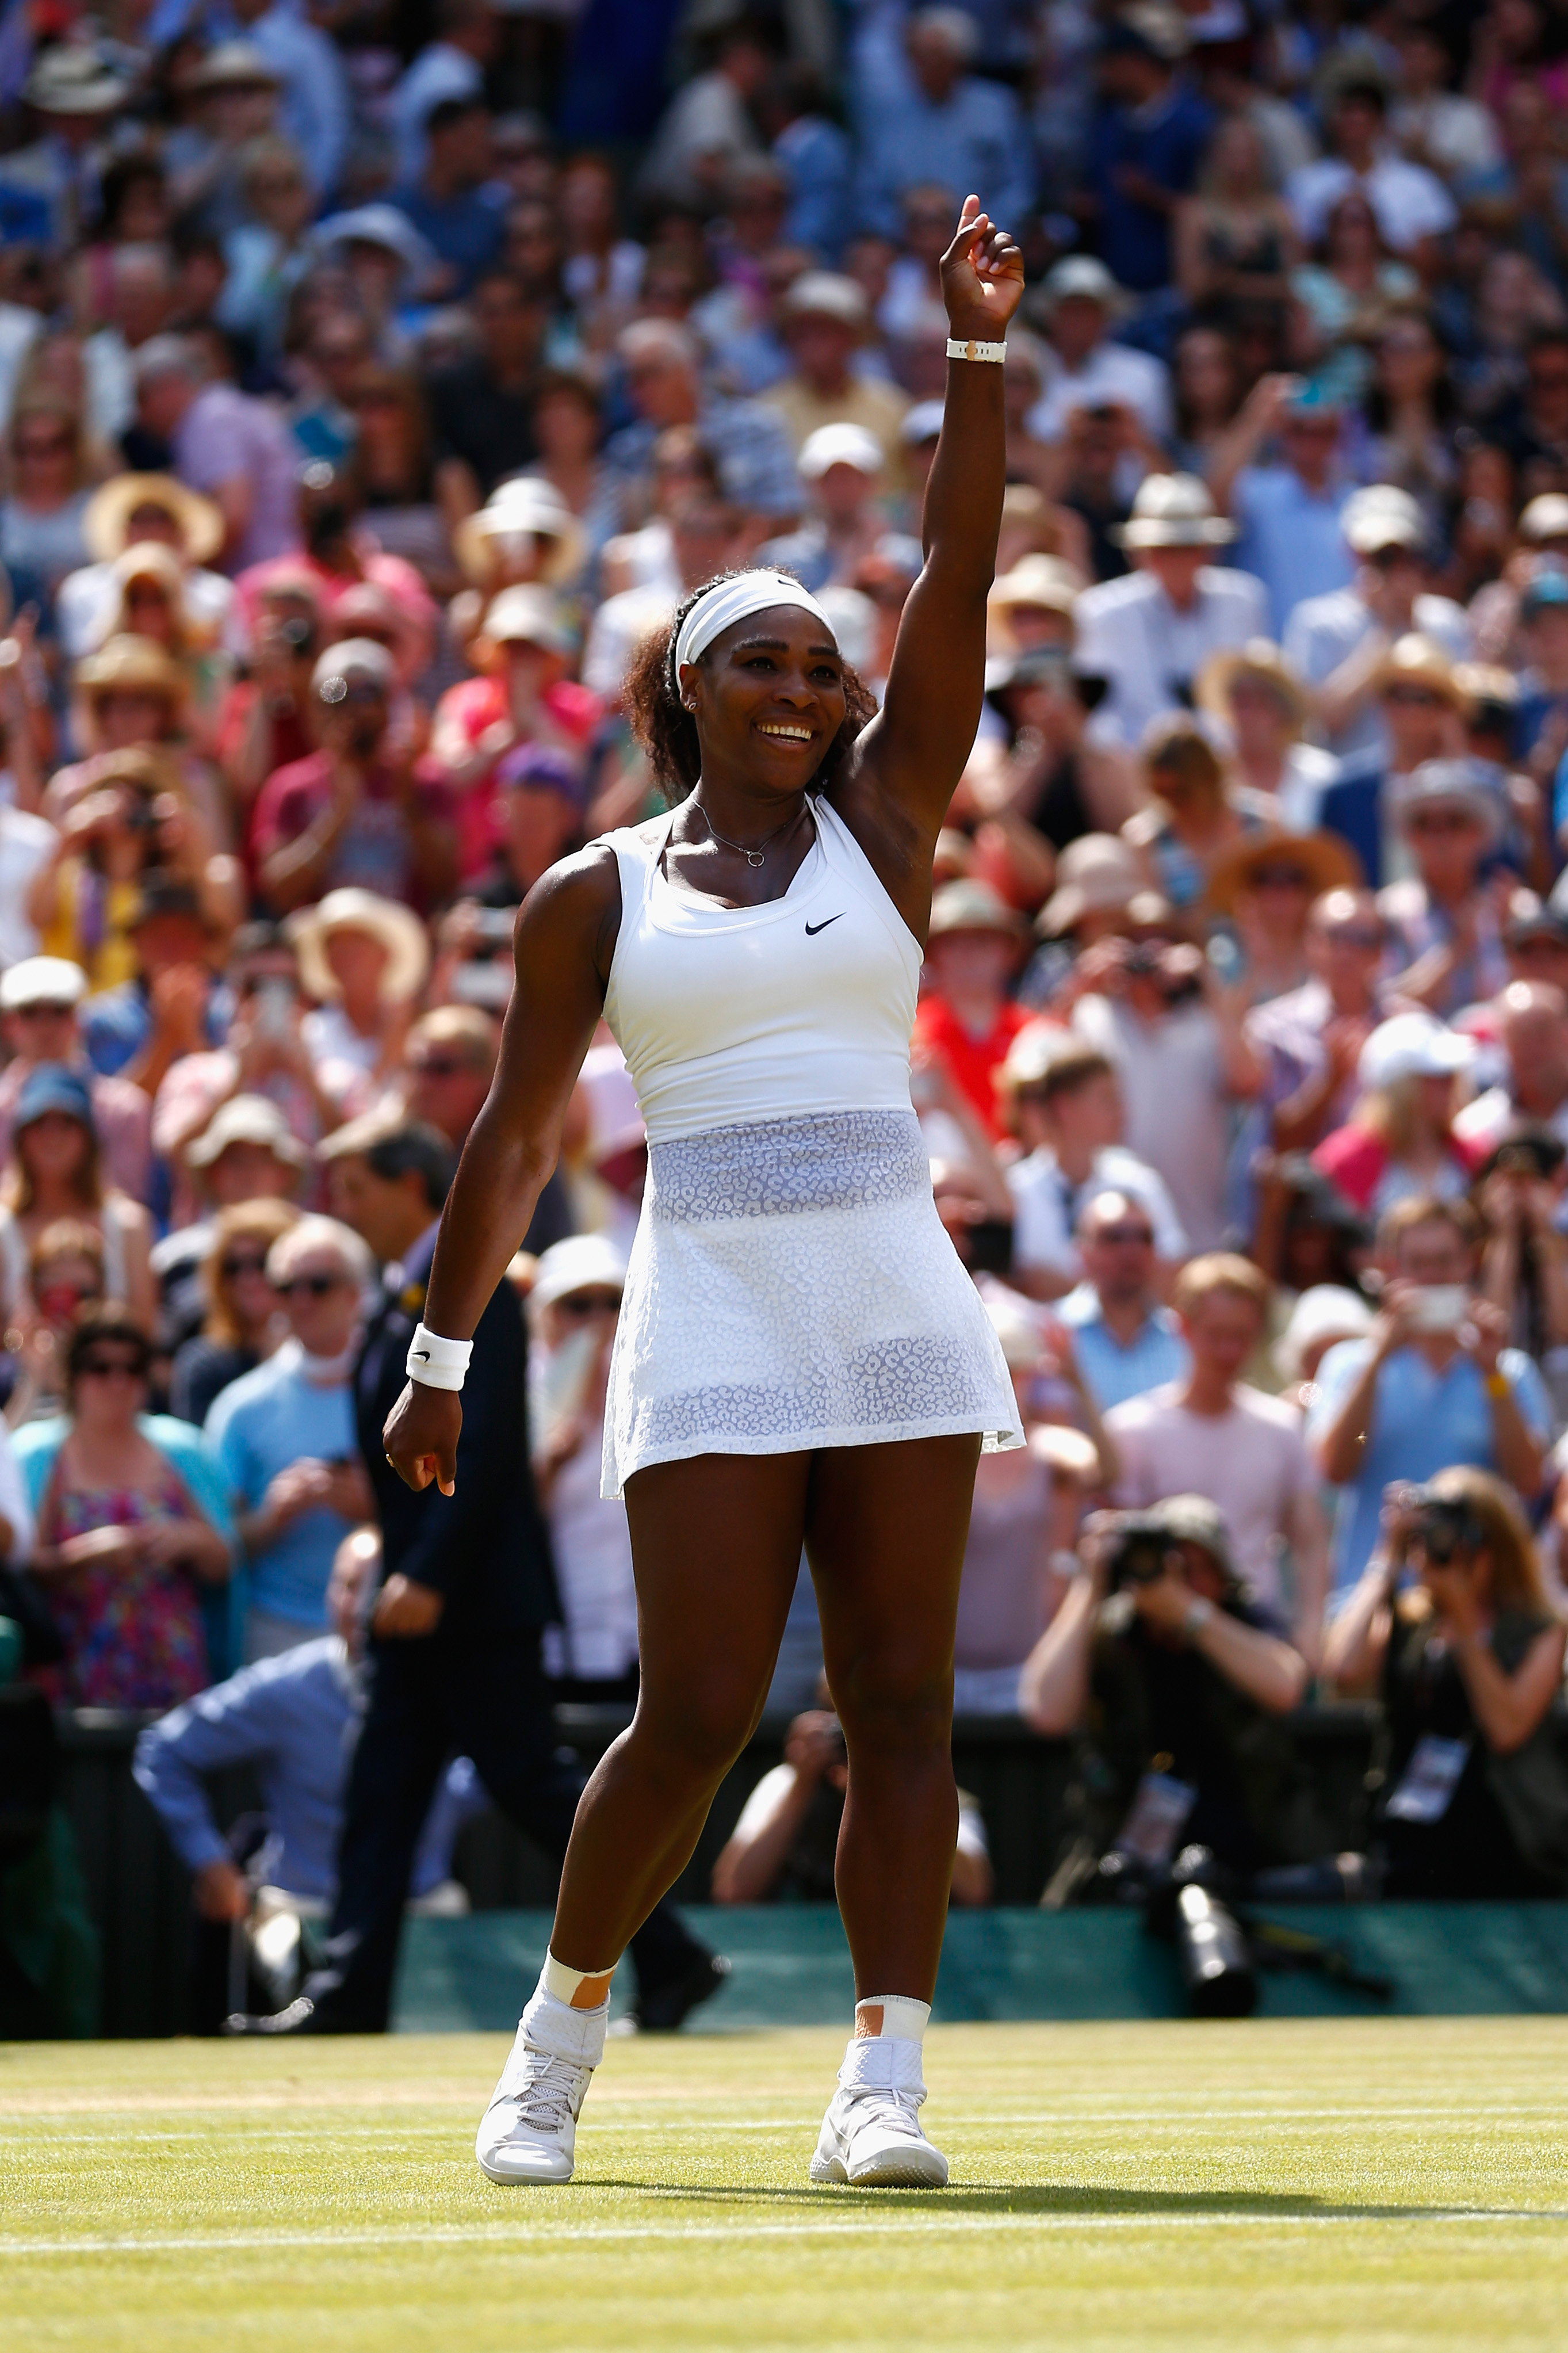 Serena Williams celebrates after winning the Final of the Ladies Singles against Garbine Muguruza of Spain during the day 12 of the Wimbledon Lawn Tennis Championships at the All England Lawn Tennis and Croquet Club in London, England on July 11, 2015.